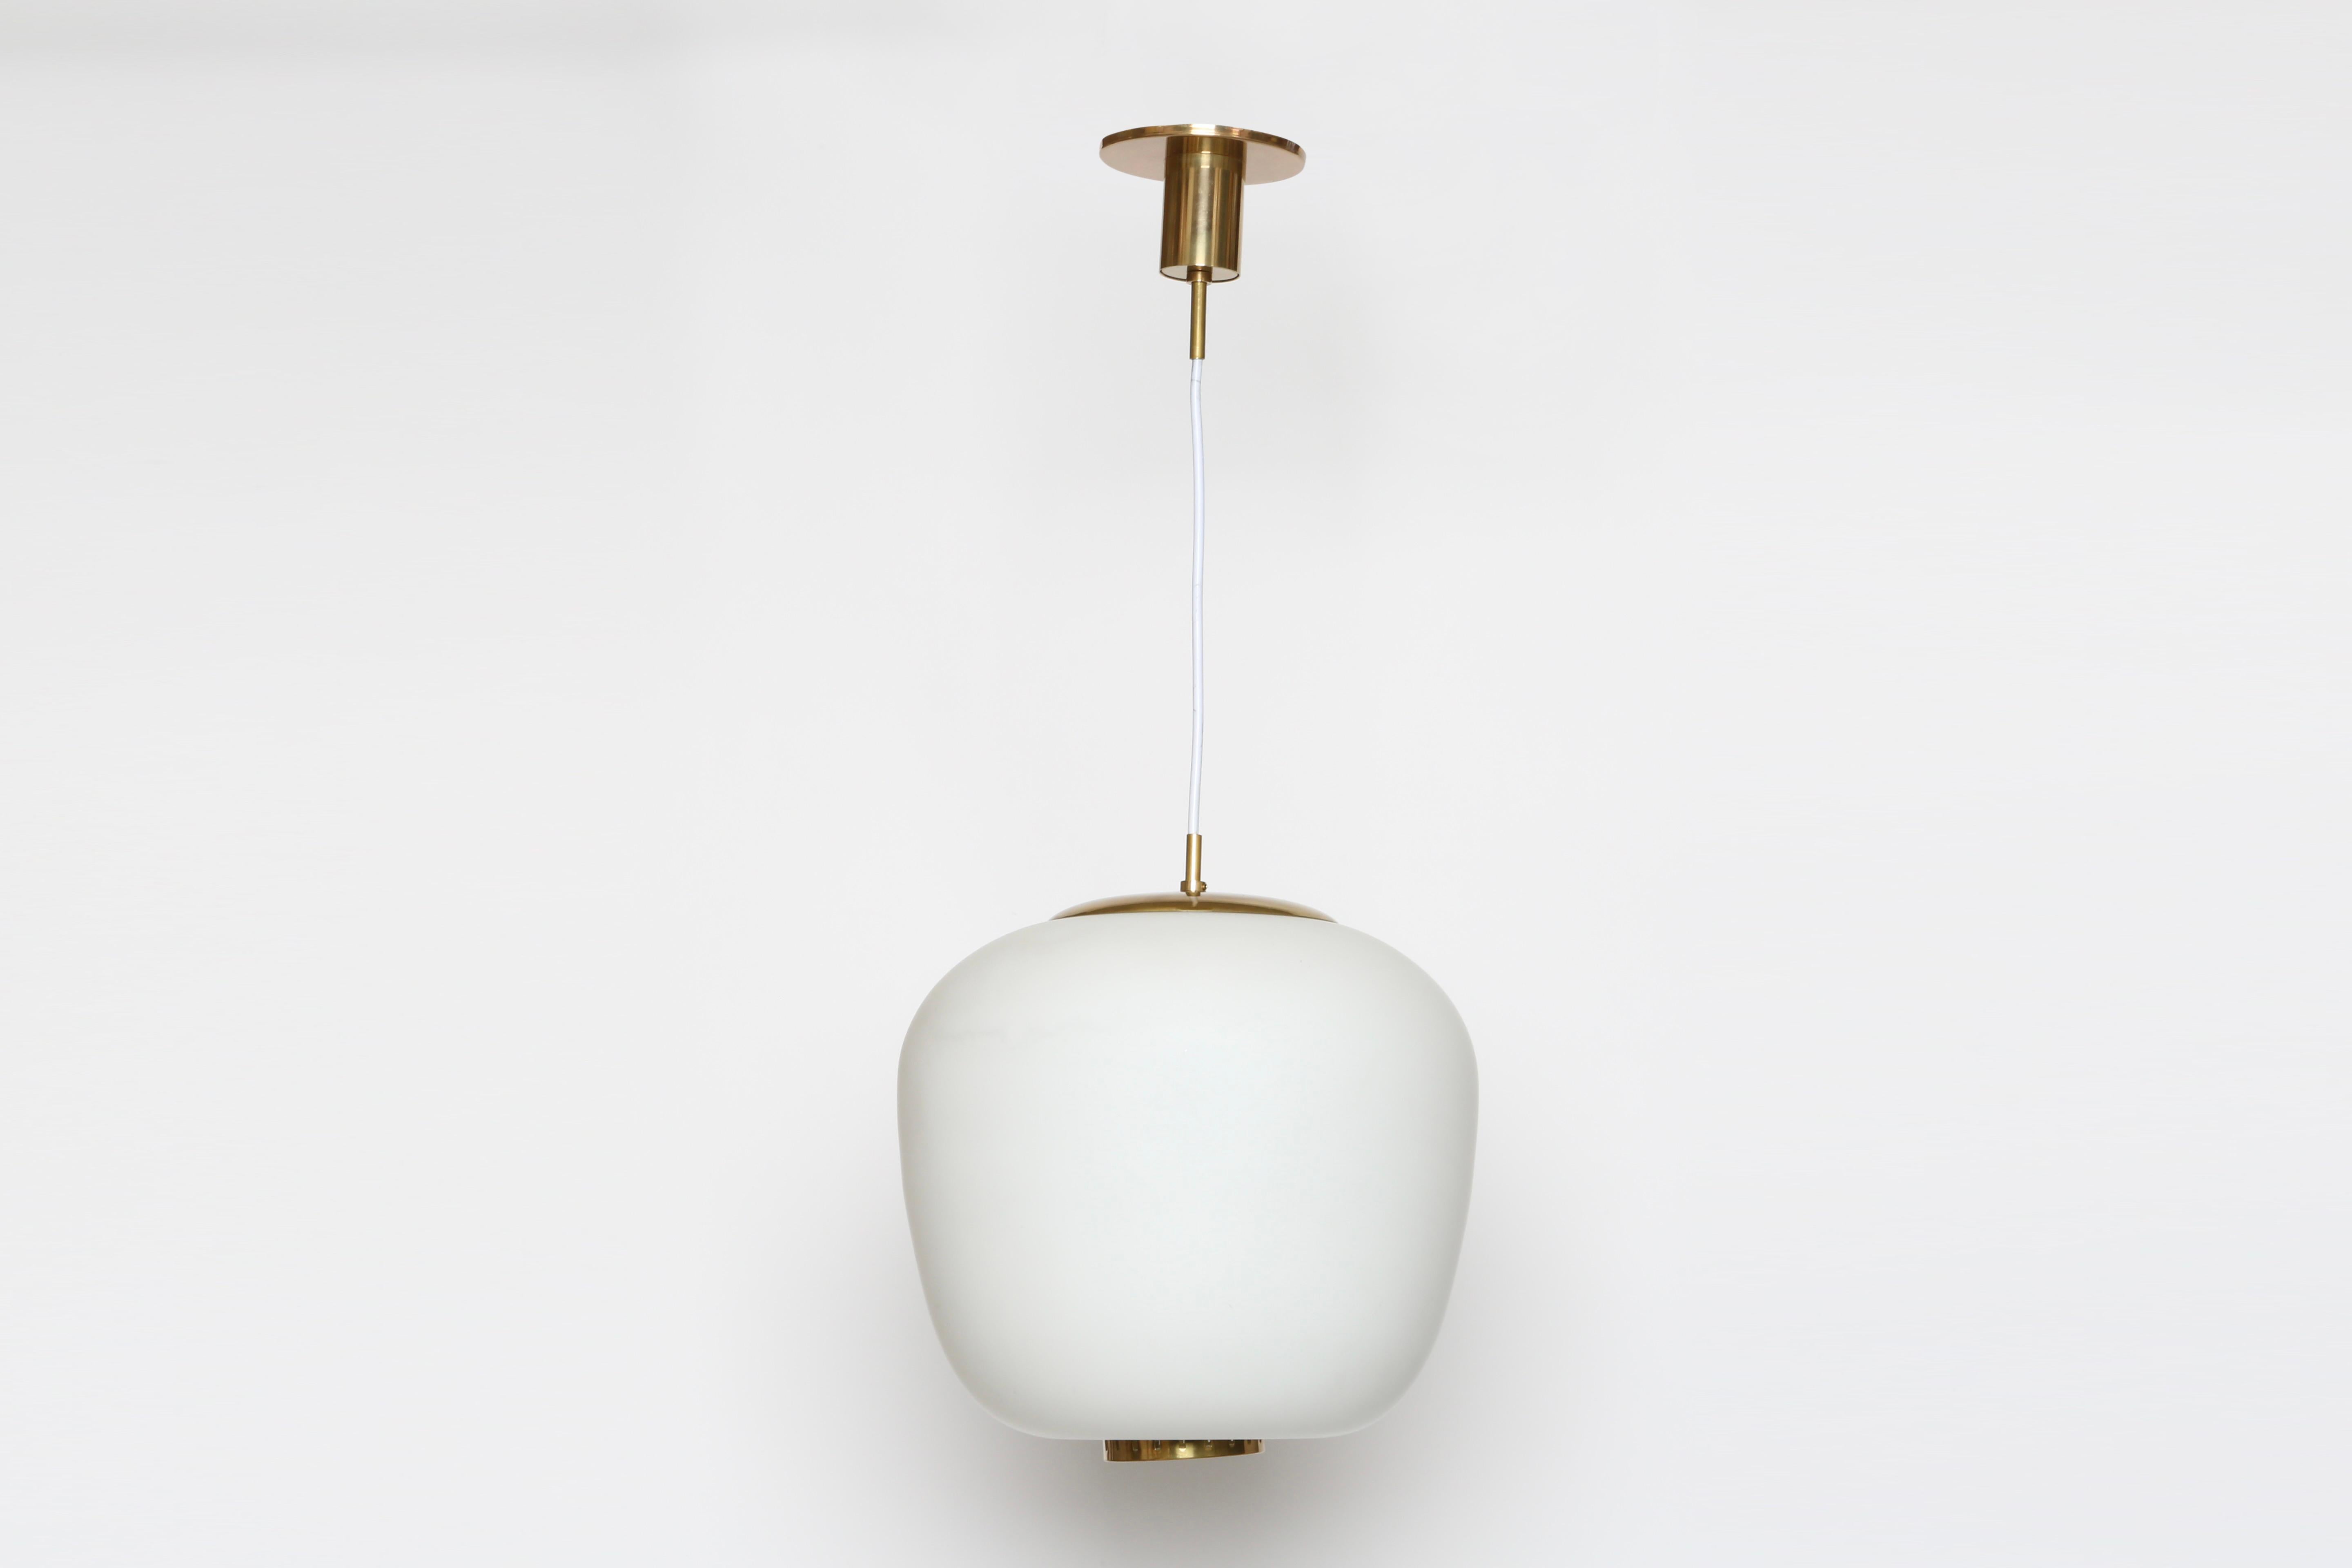 Stilnovo ceiling pendant
Designed and made in Italy, 1960s
Opaline glass, textured glass diffuser.
Rewired for US.
Takes one medium base bulb. 
Overall drop is adjustable.
Height of the glass is 13.5 inches.
Beautifully refinished brass.

We take